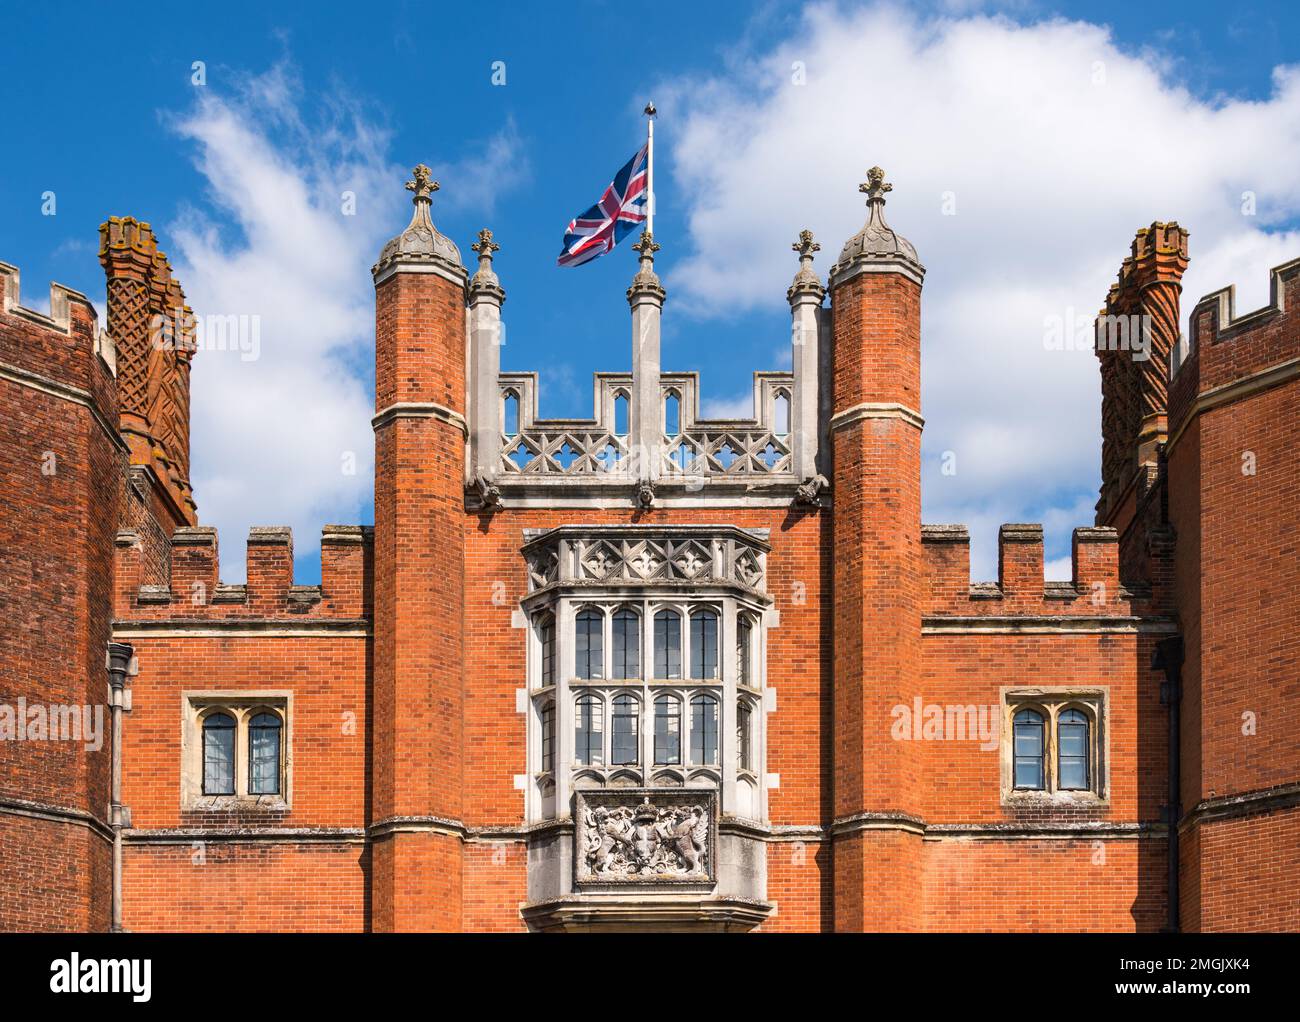 The Great Gatehouse, Hampton court Palace, Londres, Angleterre Banque D'Images